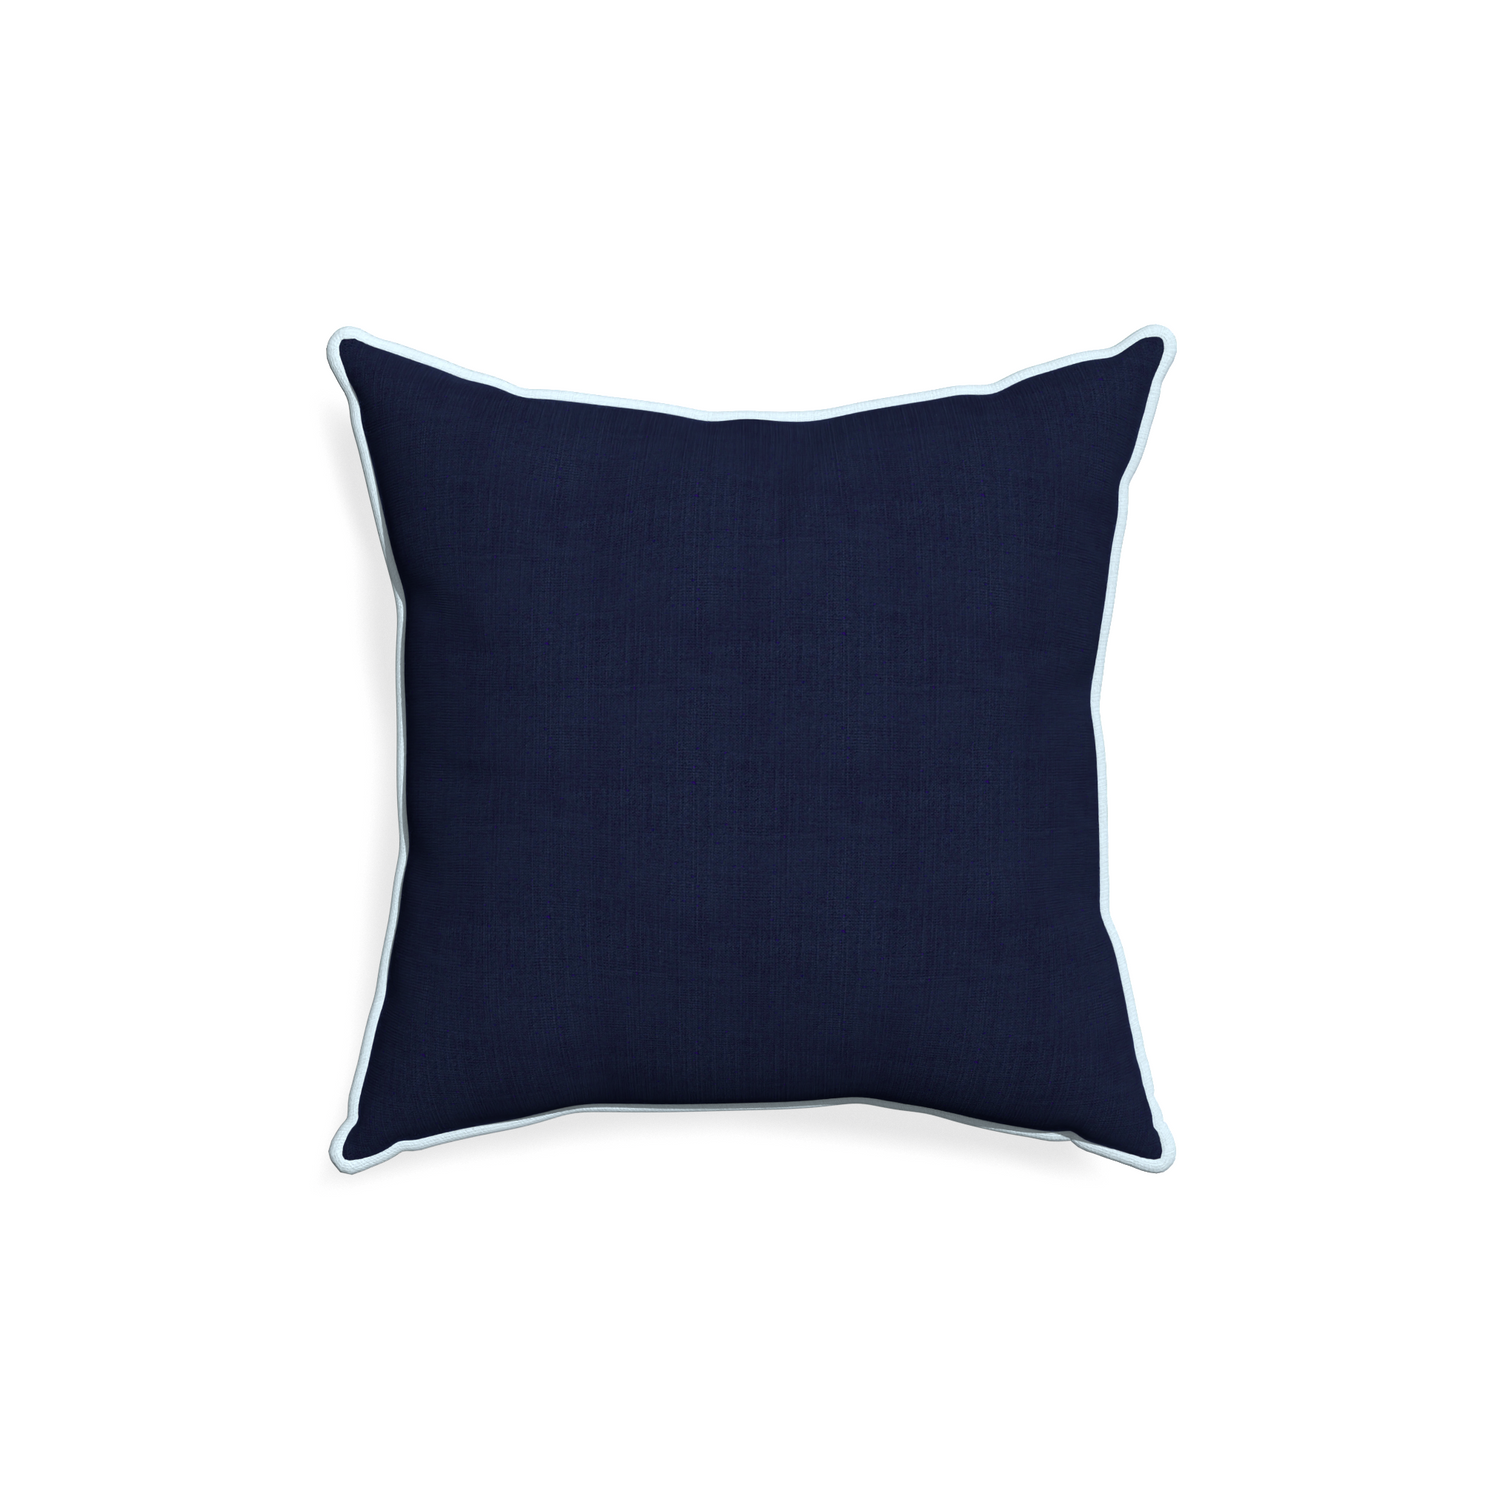 18-square midnight custom pillow with powder piping on white background